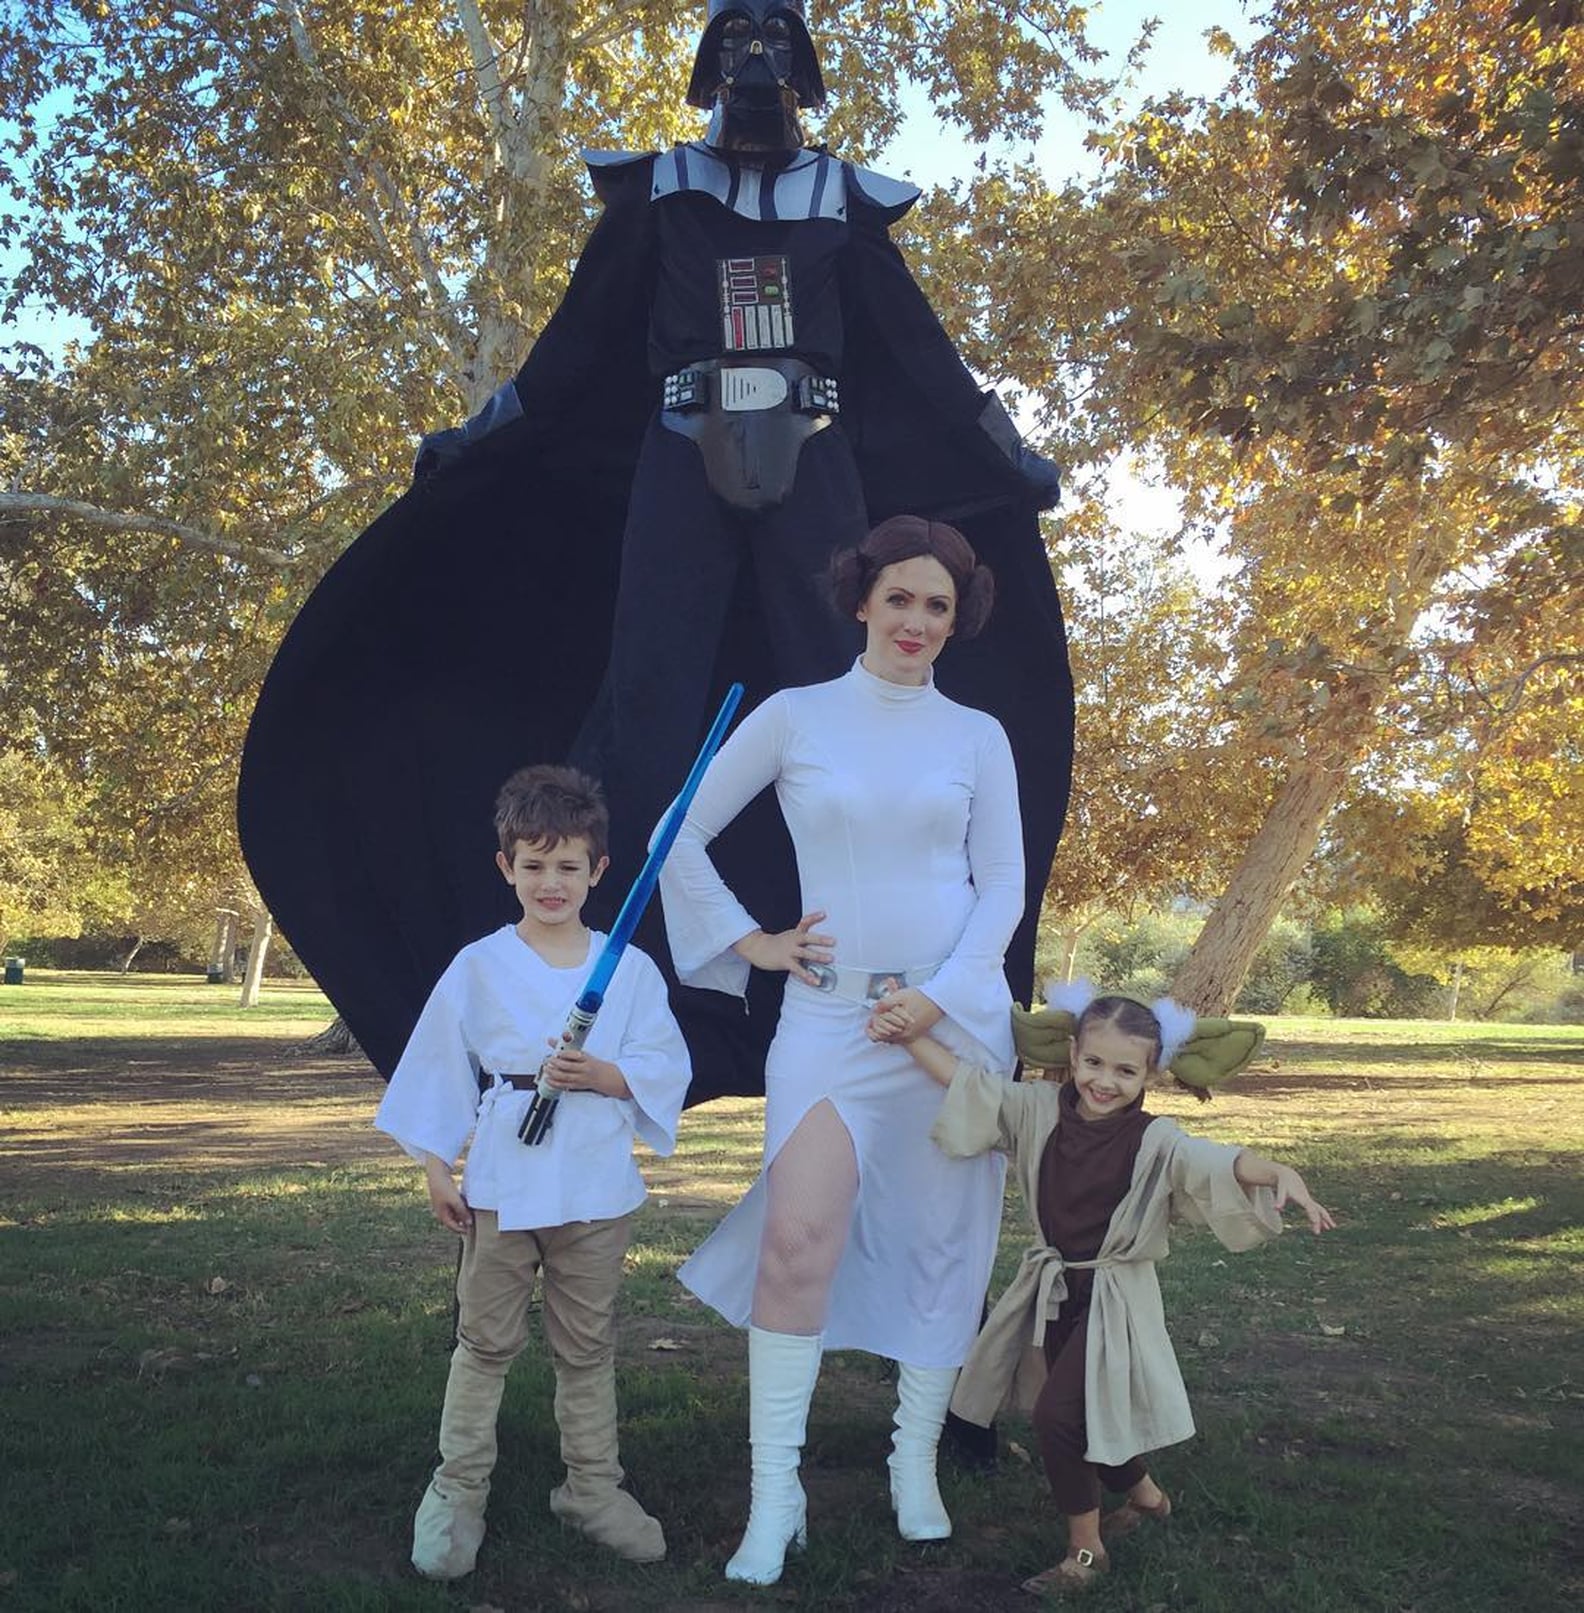 Most Popular Halloween Costumes For Kids in 2019 | POPSUGAR Family